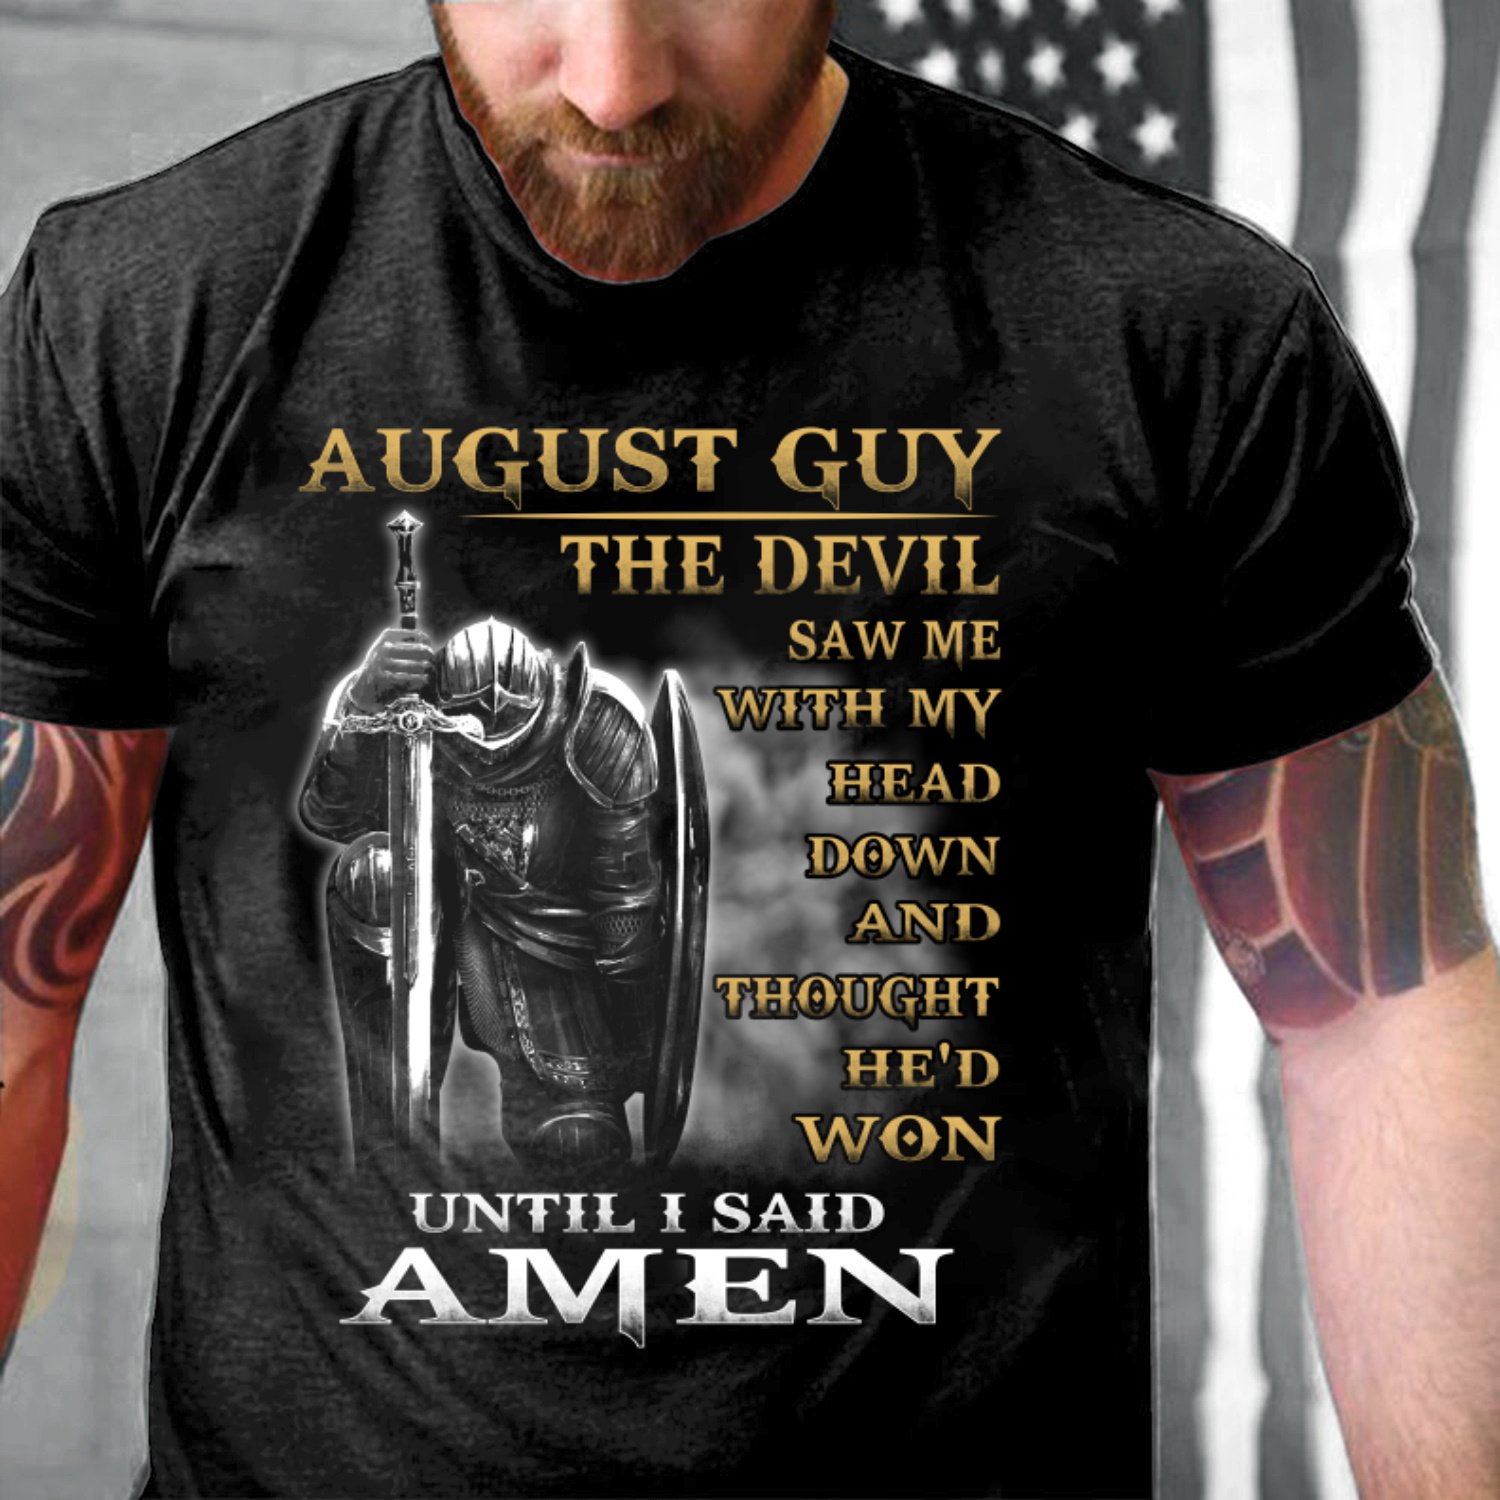 August Guy The Devil Saw Me With My Head Down And Thought He'd Won Until I Said Amen T-Shirt